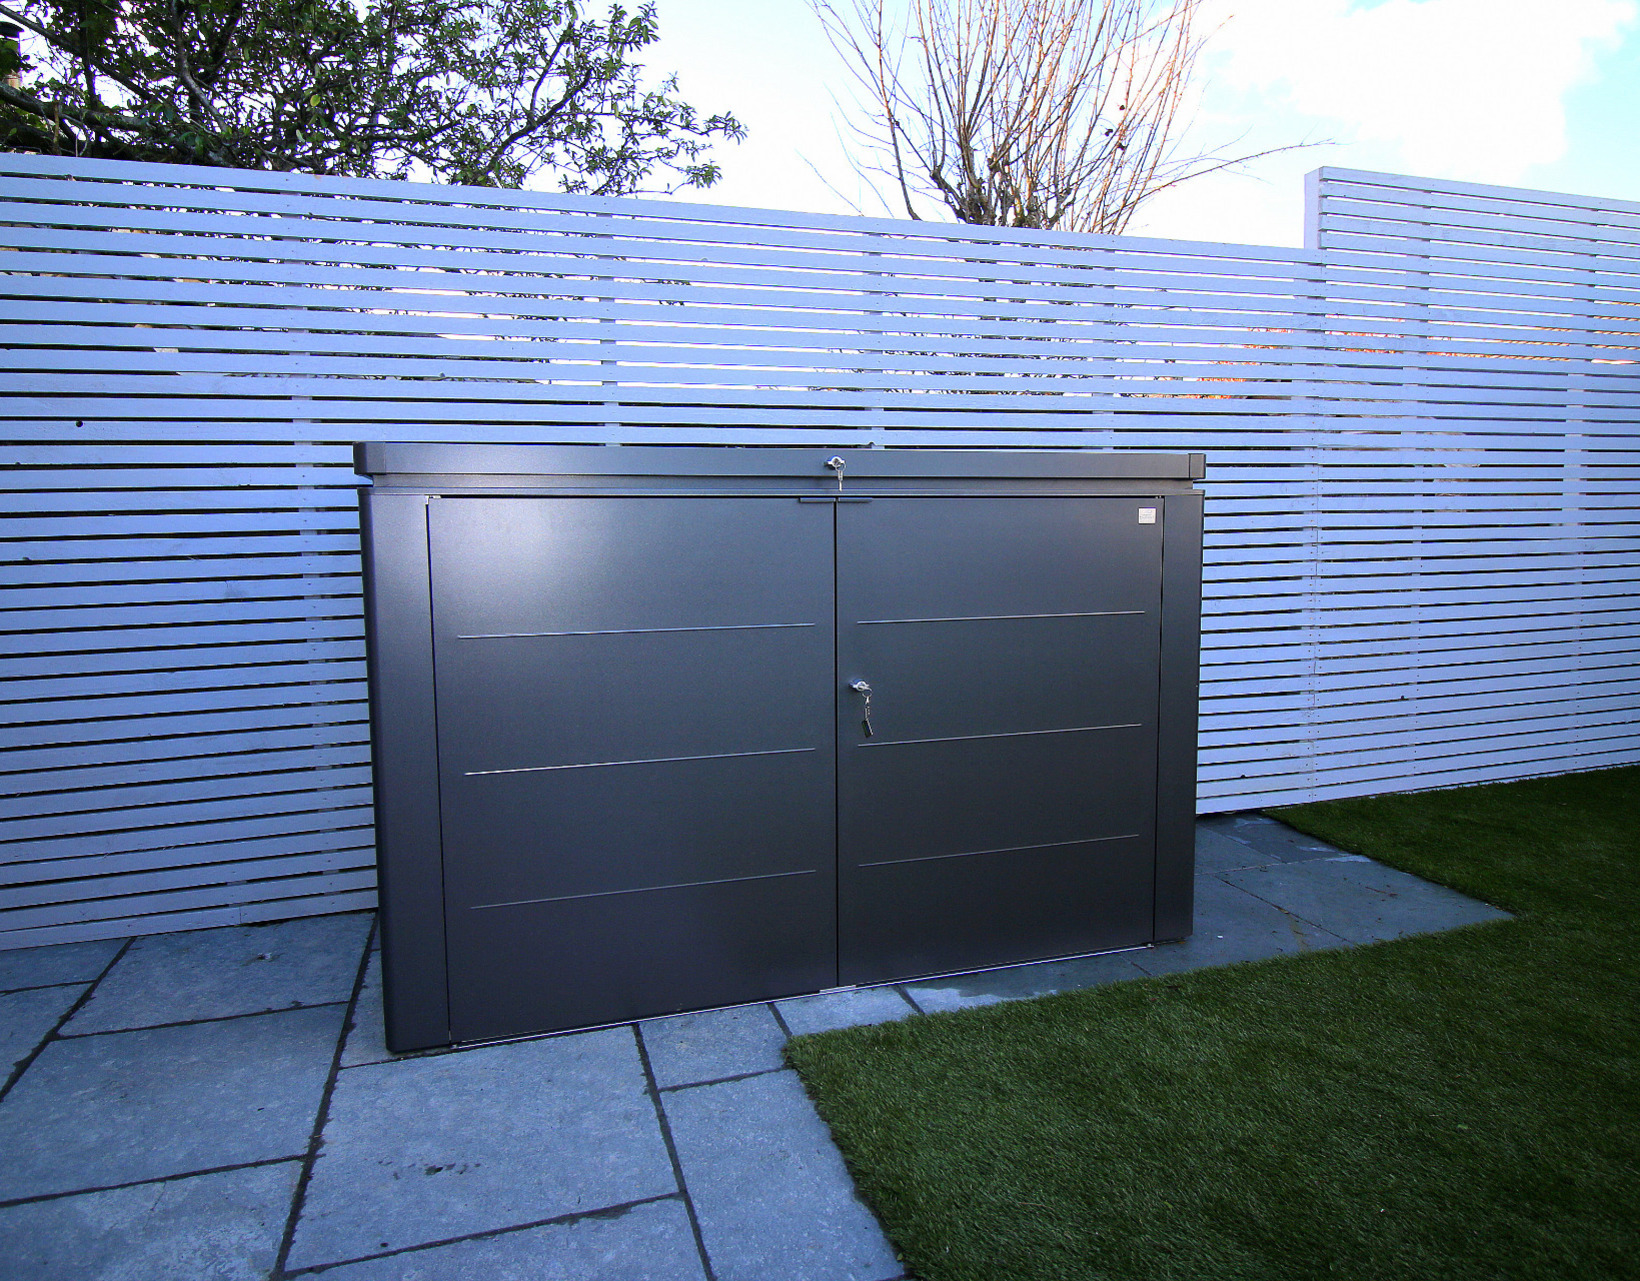 The Biohort HighBoard 200 Wheelie Bin Storage Unit with capacity for 3 large Wheelie Bins | Exceptionally well made with premium steel to provide stylish, robust and secure storage.  | Supplied + Fitted in Templeogue, Dublin 6W.